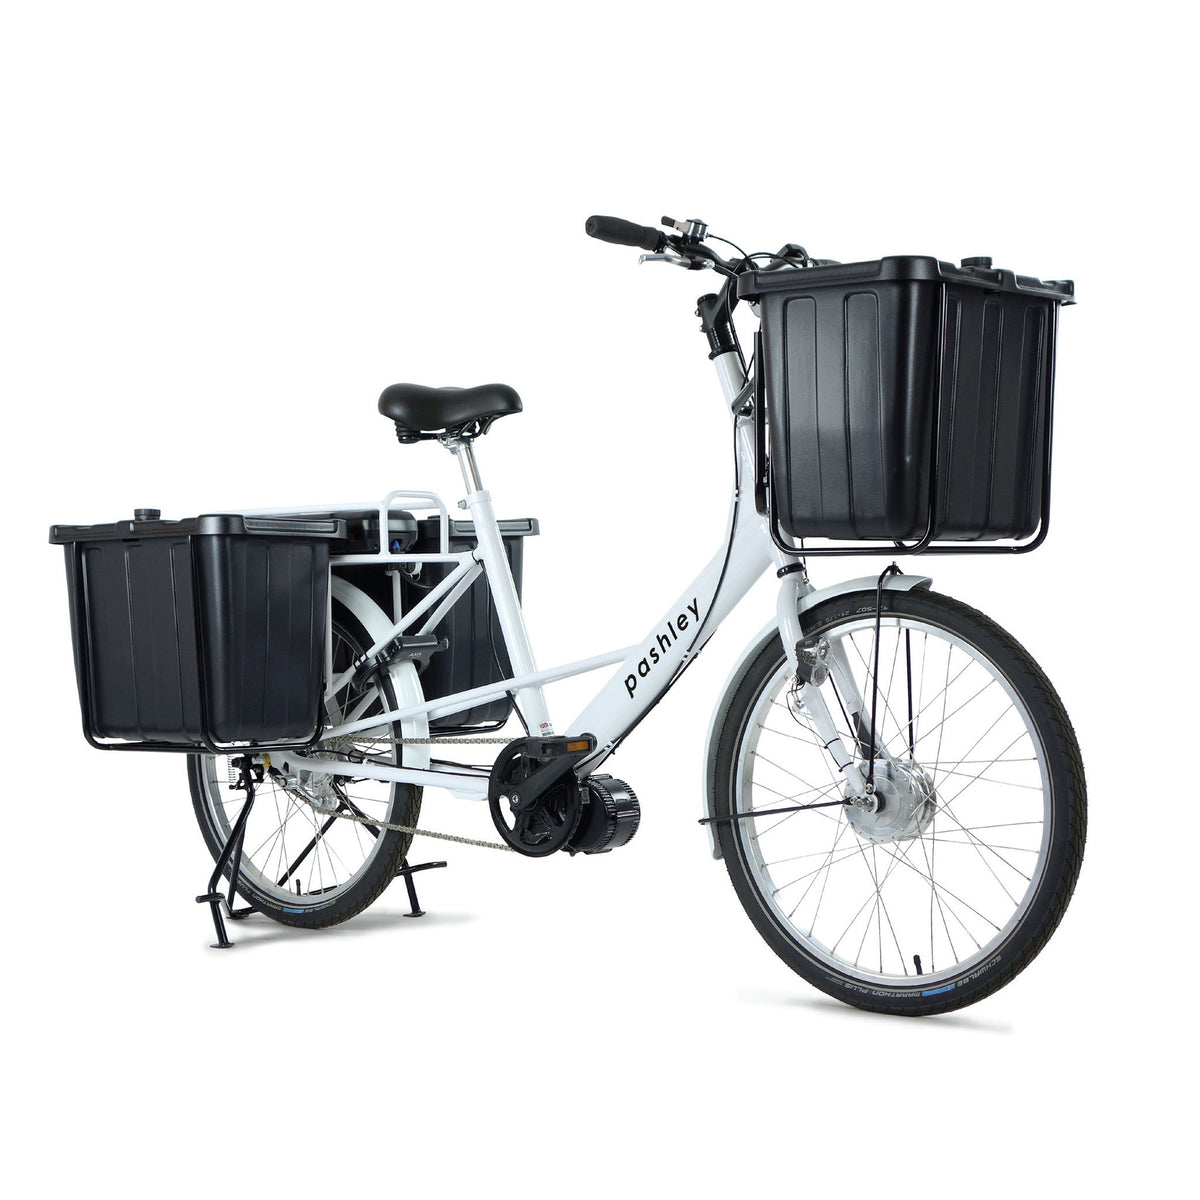 Pashley electric carg obike with large front and rear cargo boxes and tripod propstand. - front angle